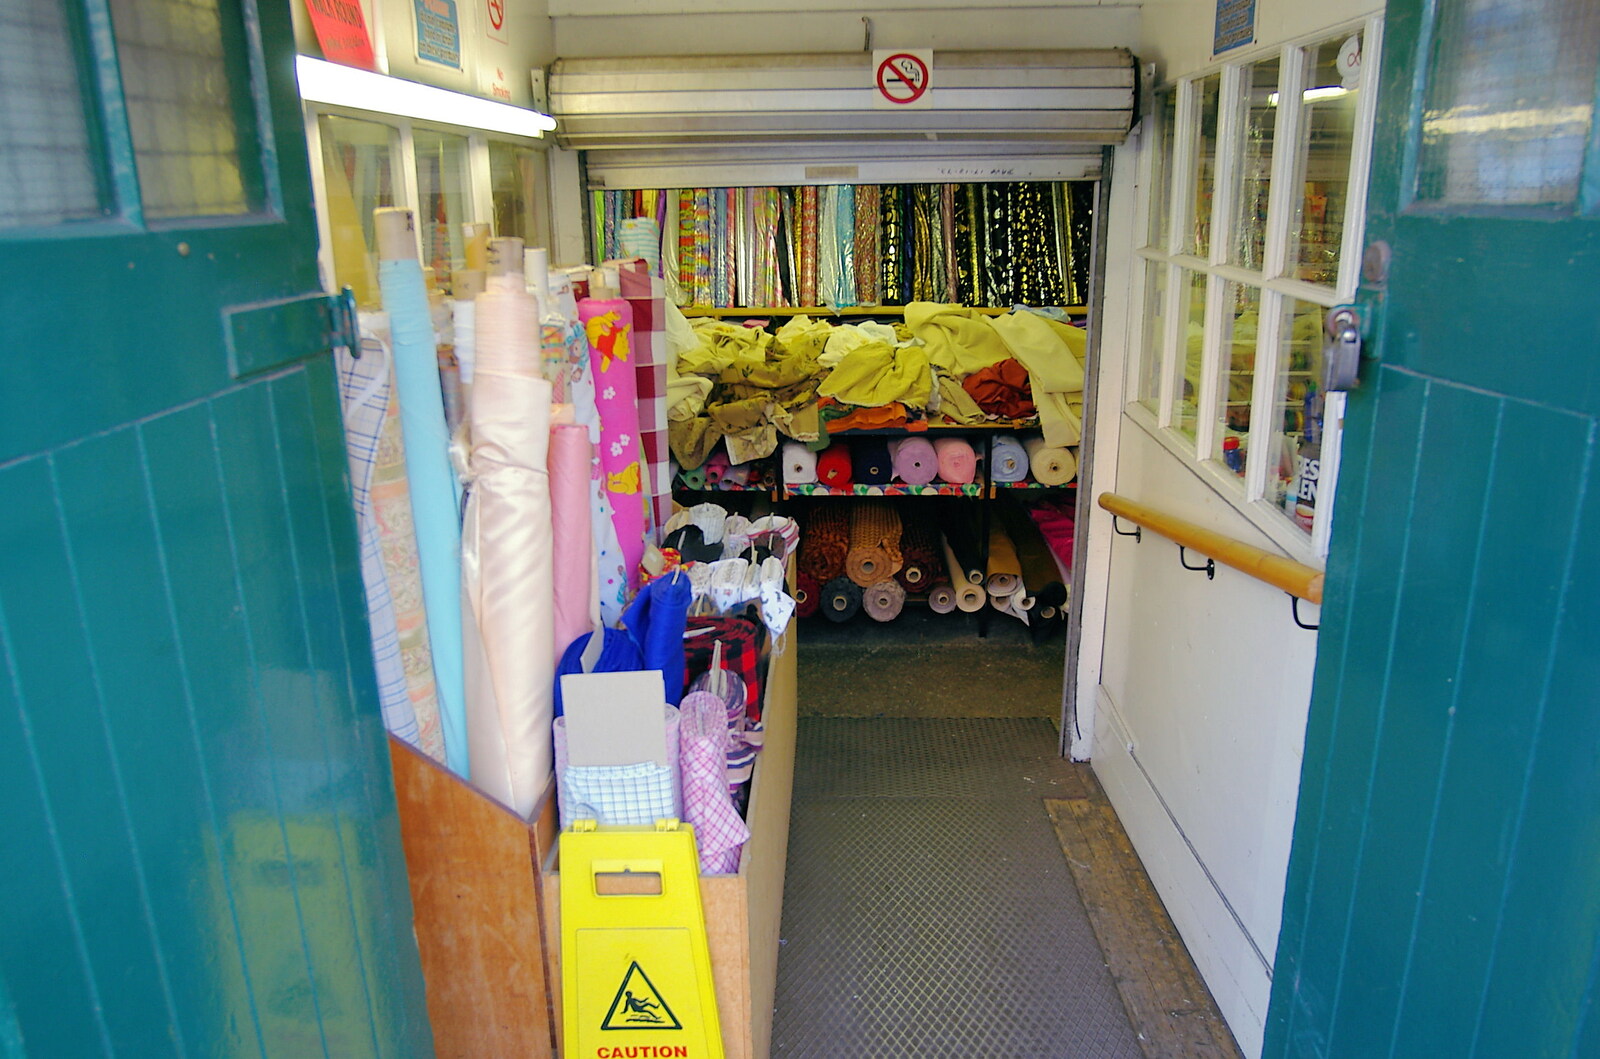 The doorway of a small fabric emporium from A Trip Around Macclesfield and Sandbach, Cheshire - 10th September 2005